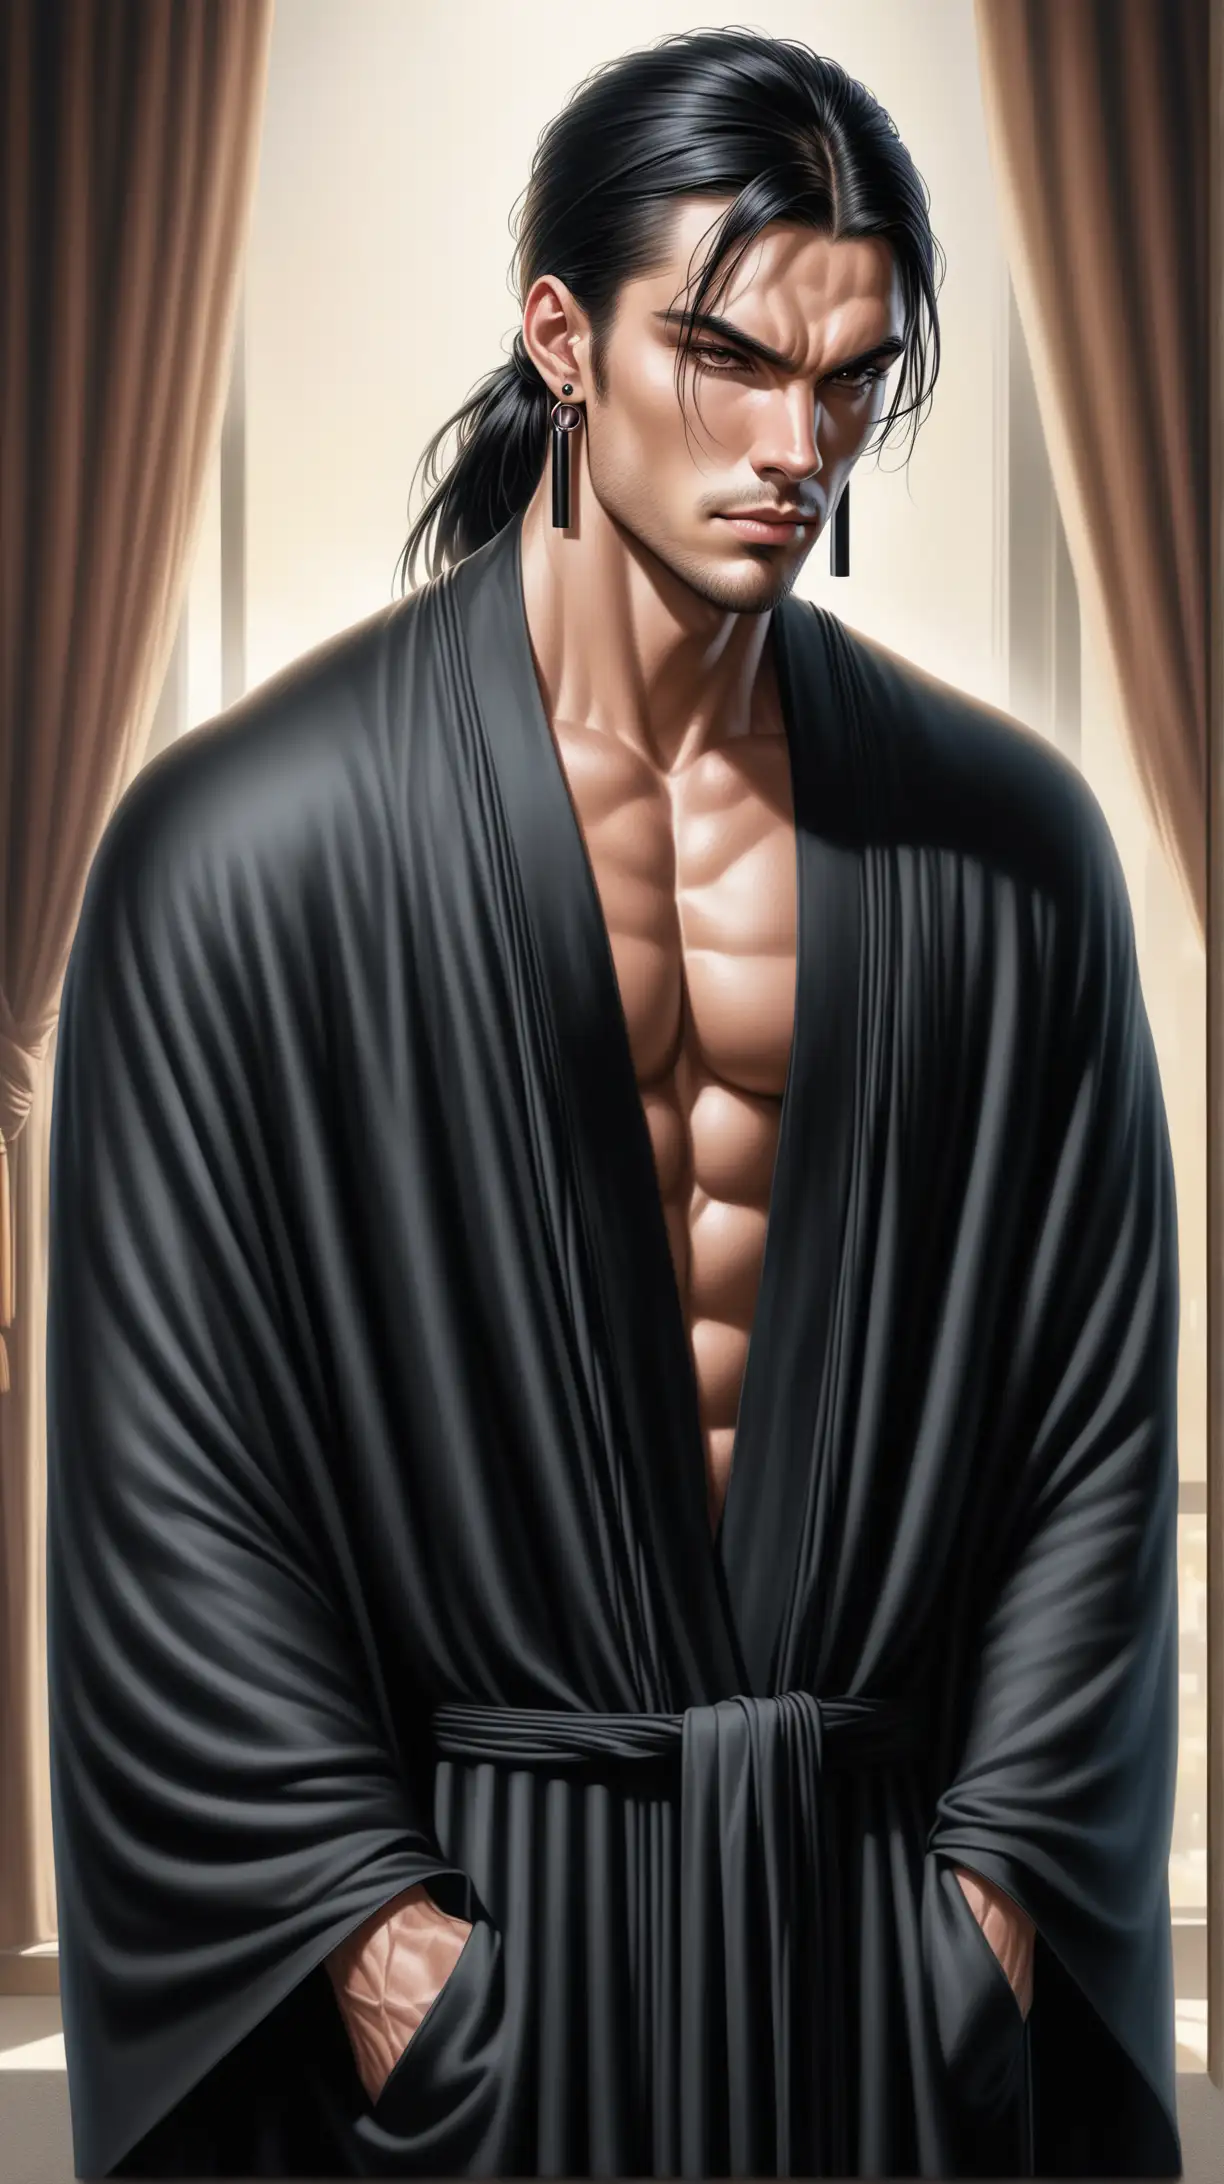 HyperRealistic Portrait of a Muscular Man with Long Black Hair and Colorful Garments